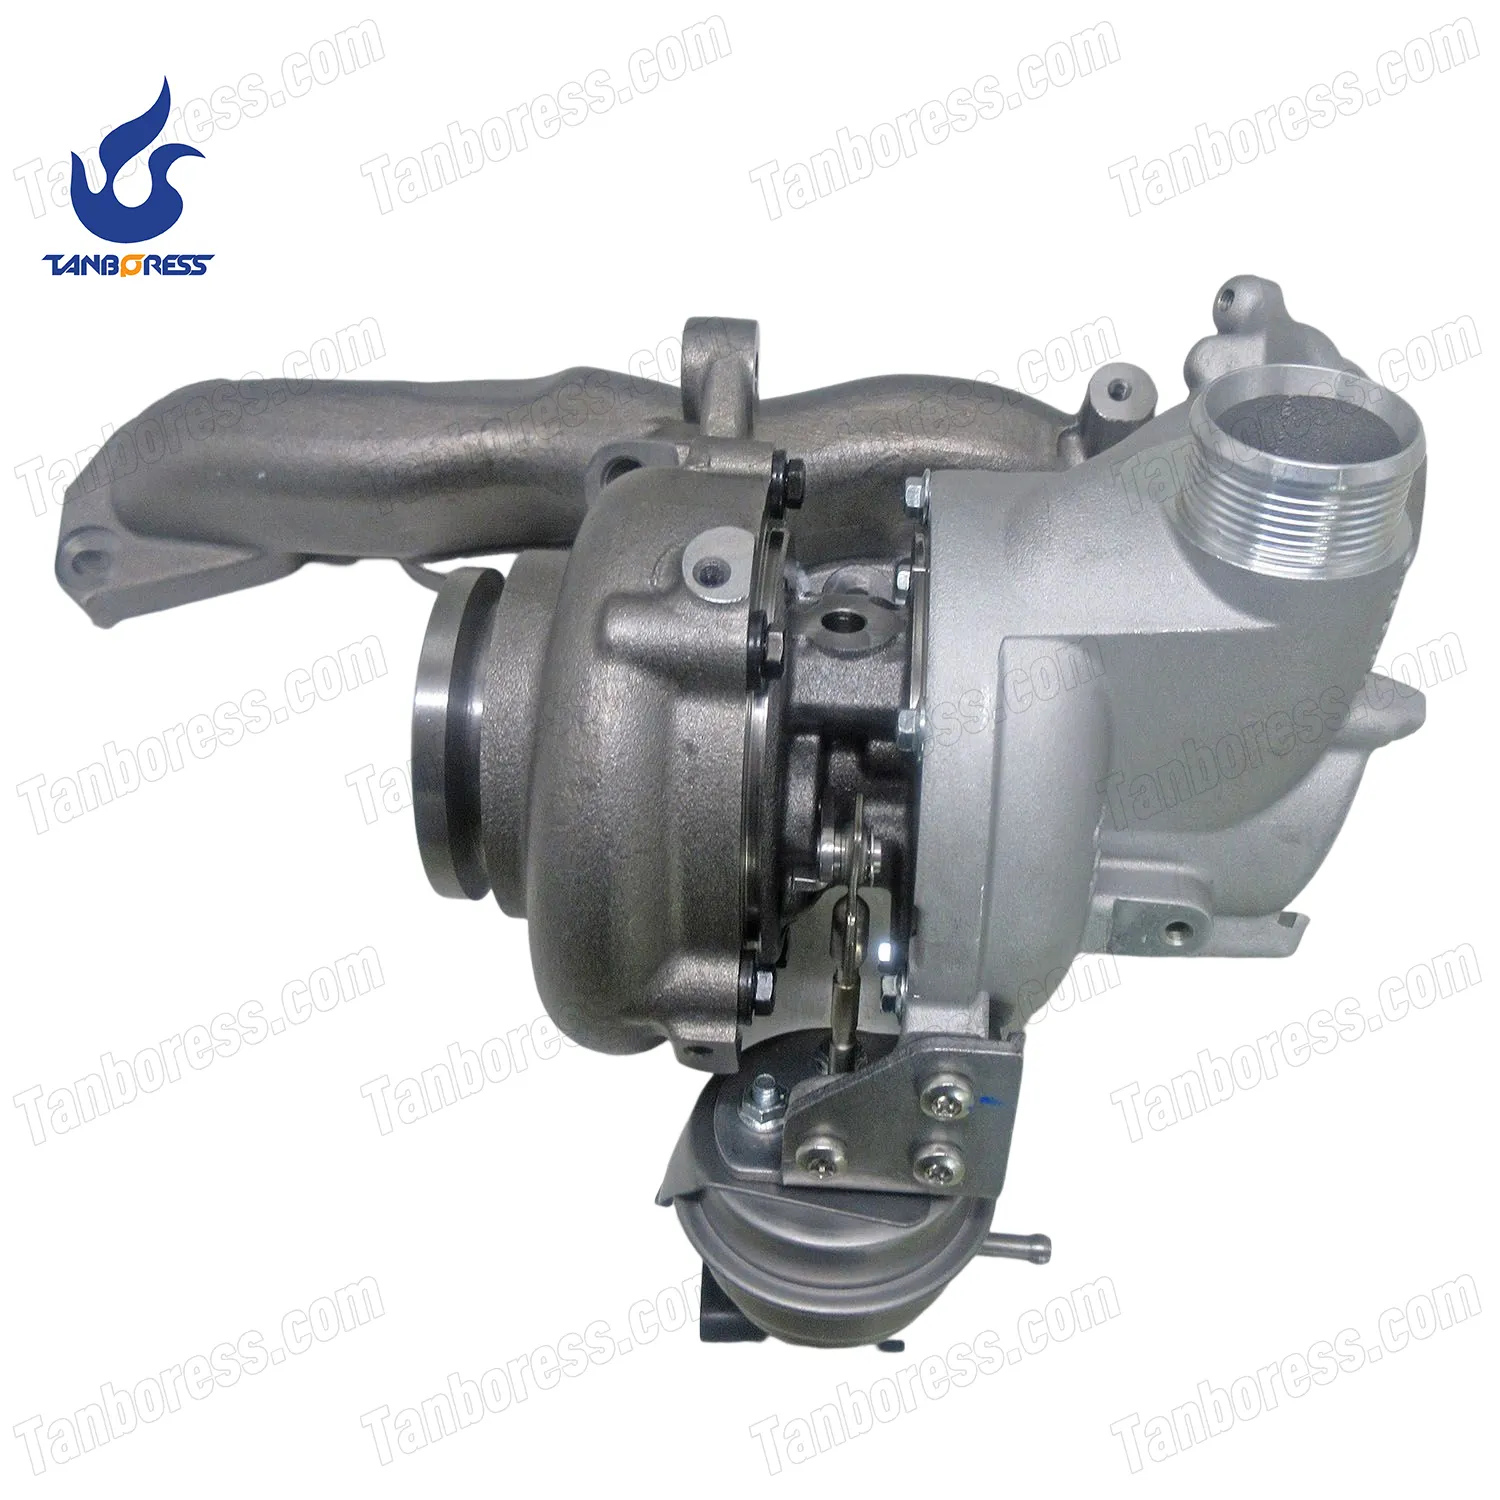 Tanboress electronically controlled turbochargers for Audi 2.0 diesel engines GTD1449VZ 04L253010H